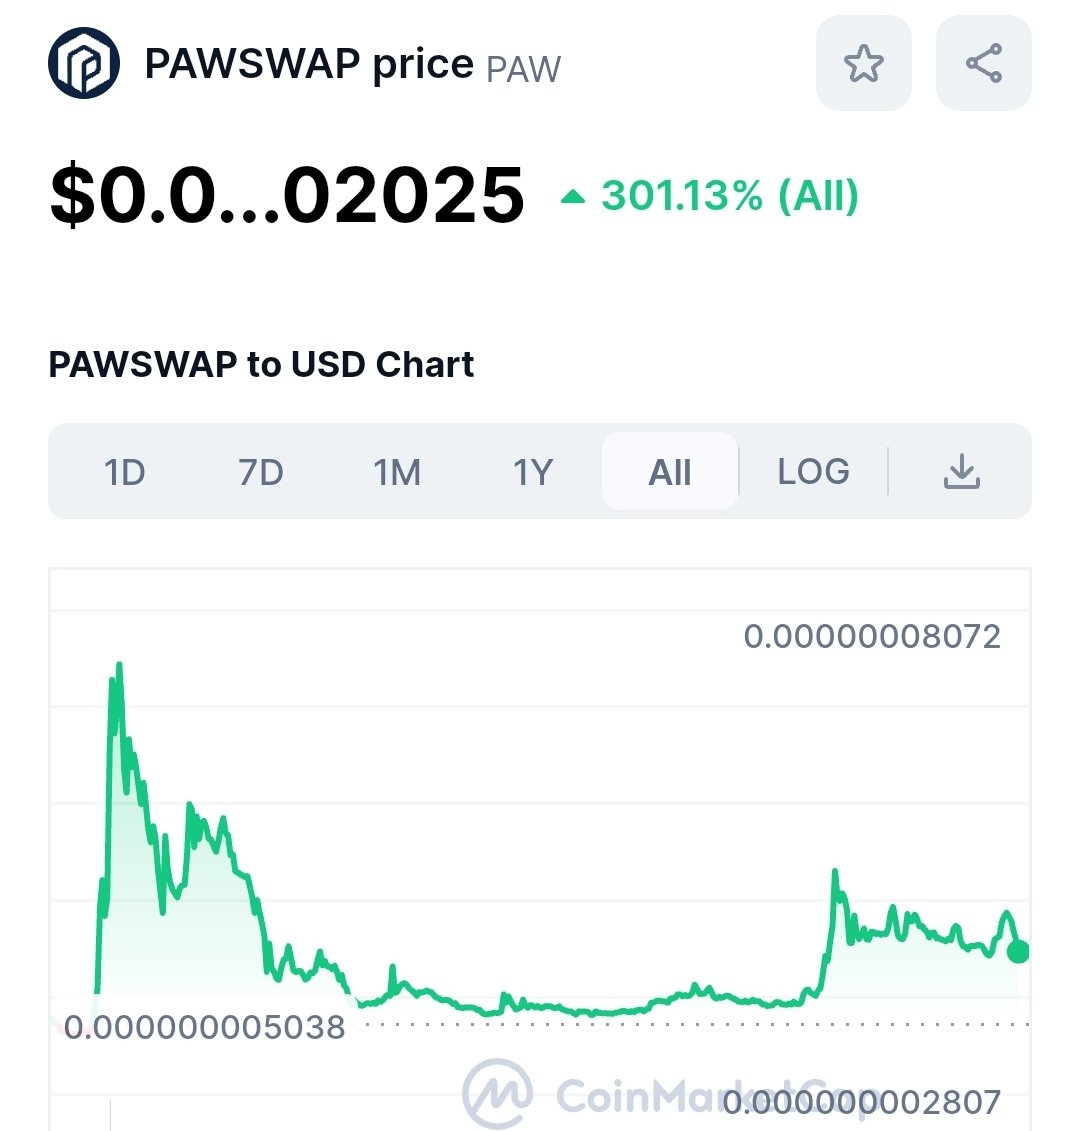 I've said this before & I'll say it again: Keep your eyes open. We've got to check the entire market as well as our investments. Stay up-to-date & follow @Cryptointerface. Also, zoom out. NFA and DYOR, but yo, +301%? And the #beta JUST released? 🤔 😼 $PAW @PawChain #PAWSWAP